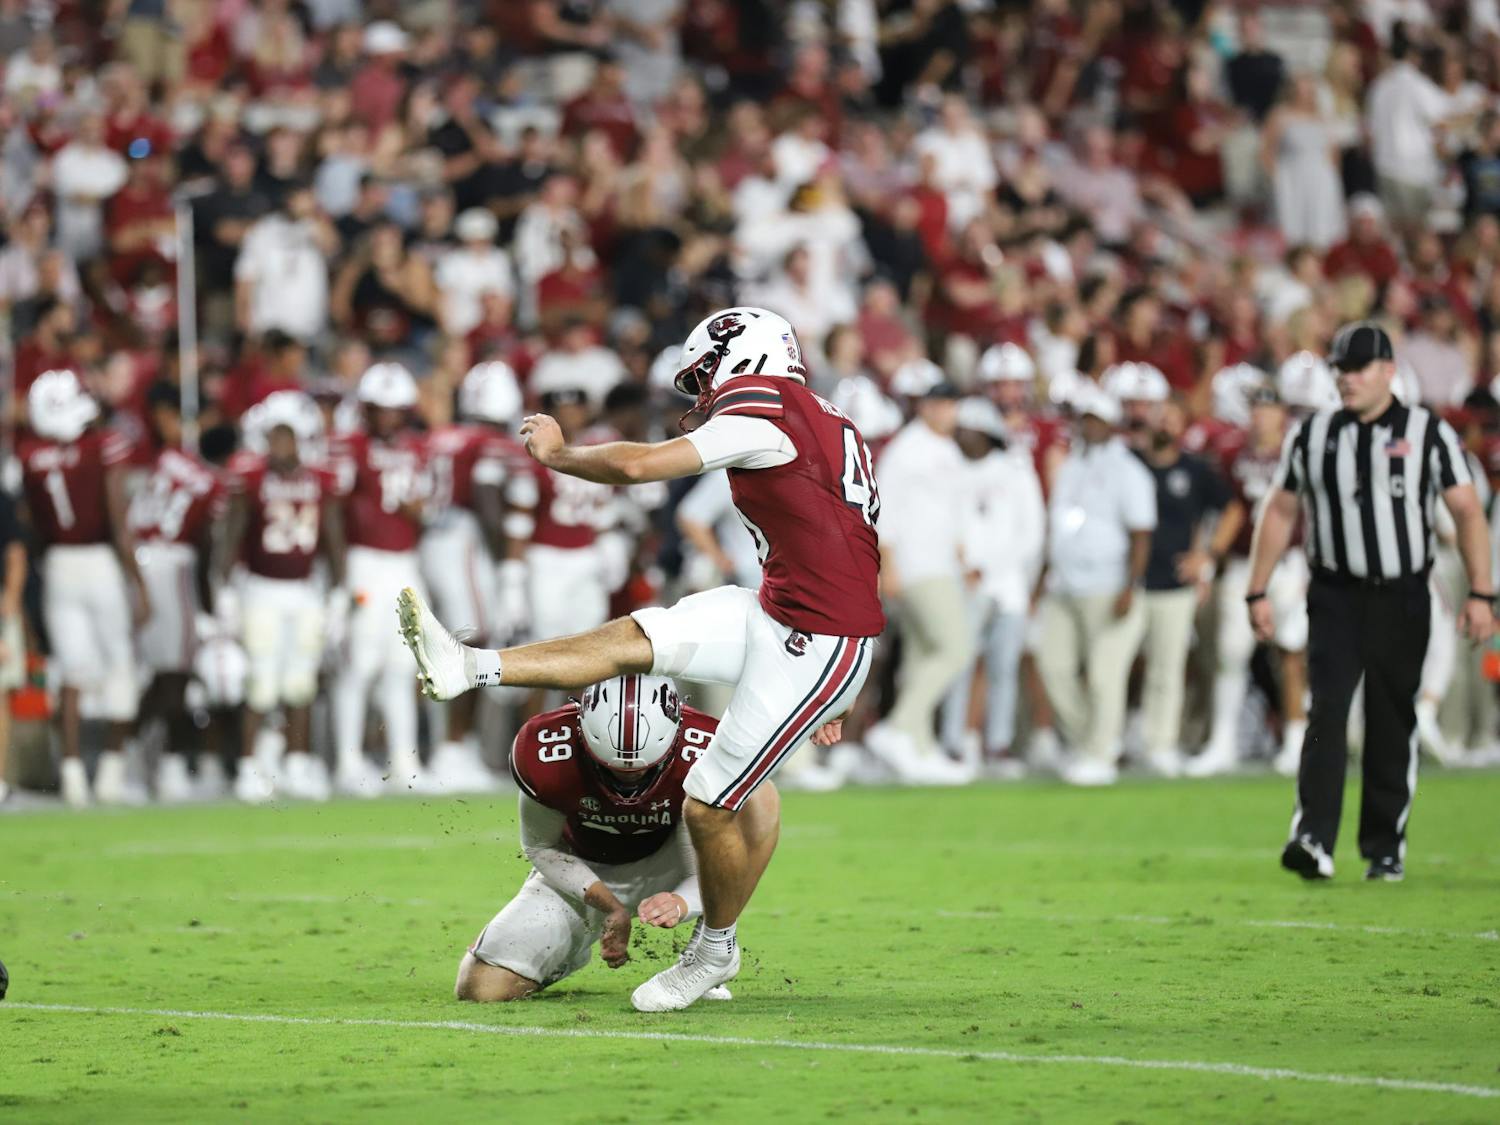 Redshirt senior placekicker Alex Herrera converts on his first extra point attempt of the year after a South Carolina touchdown in the second half of the game. South Carolina defeated Furman 47-21 in its first home game of the season.